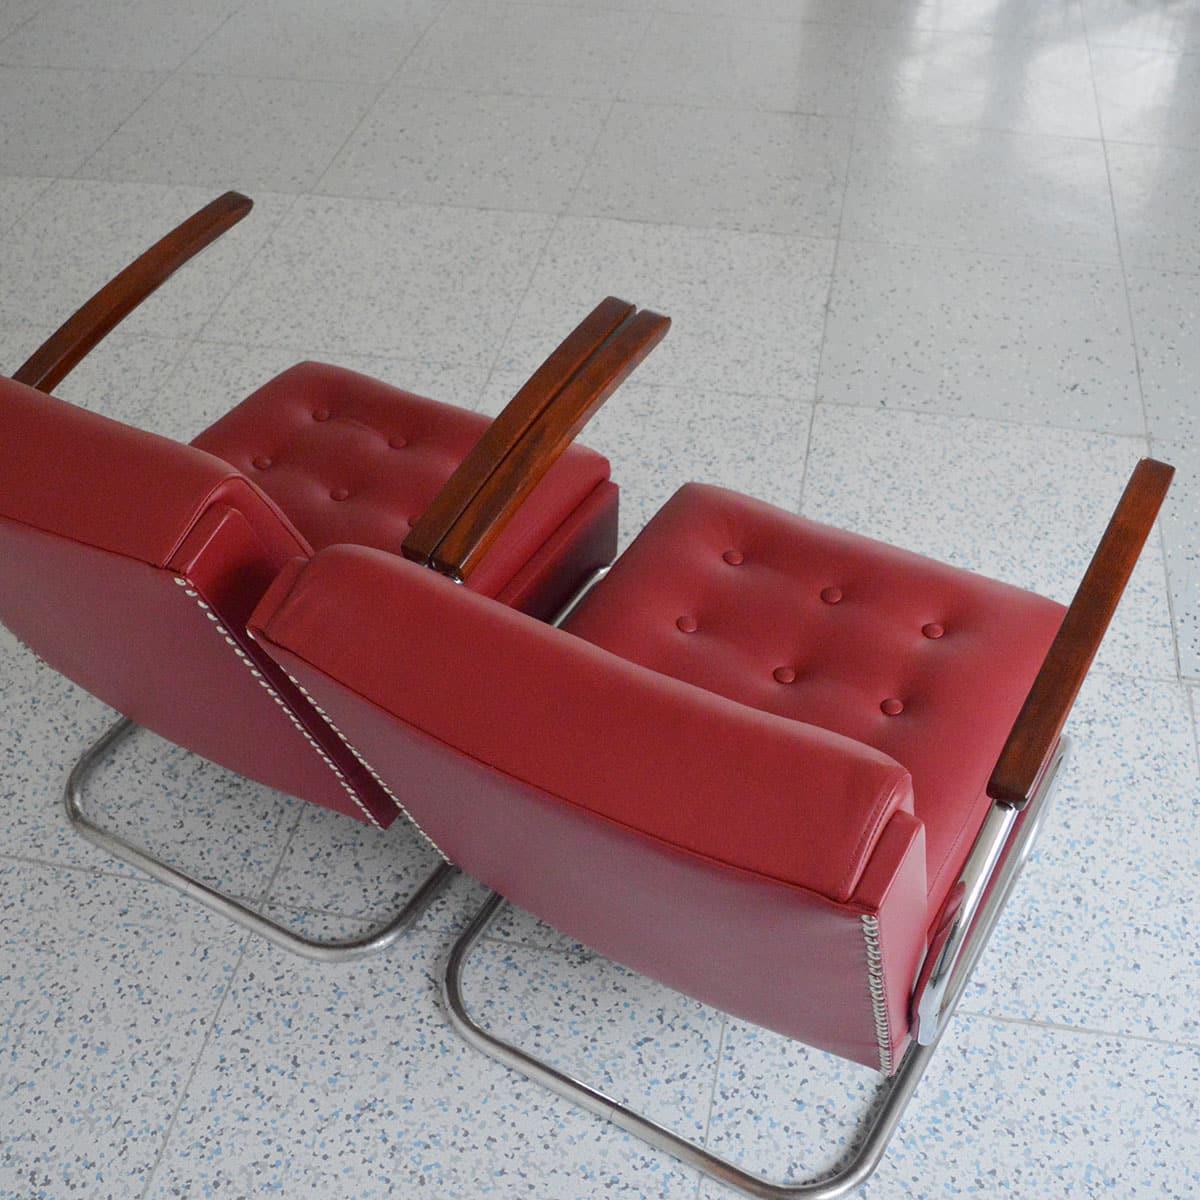 German Pair of Bauhaus Cantilever Armchairs Model S411 by Mücke & Melder, 1930s For Sale